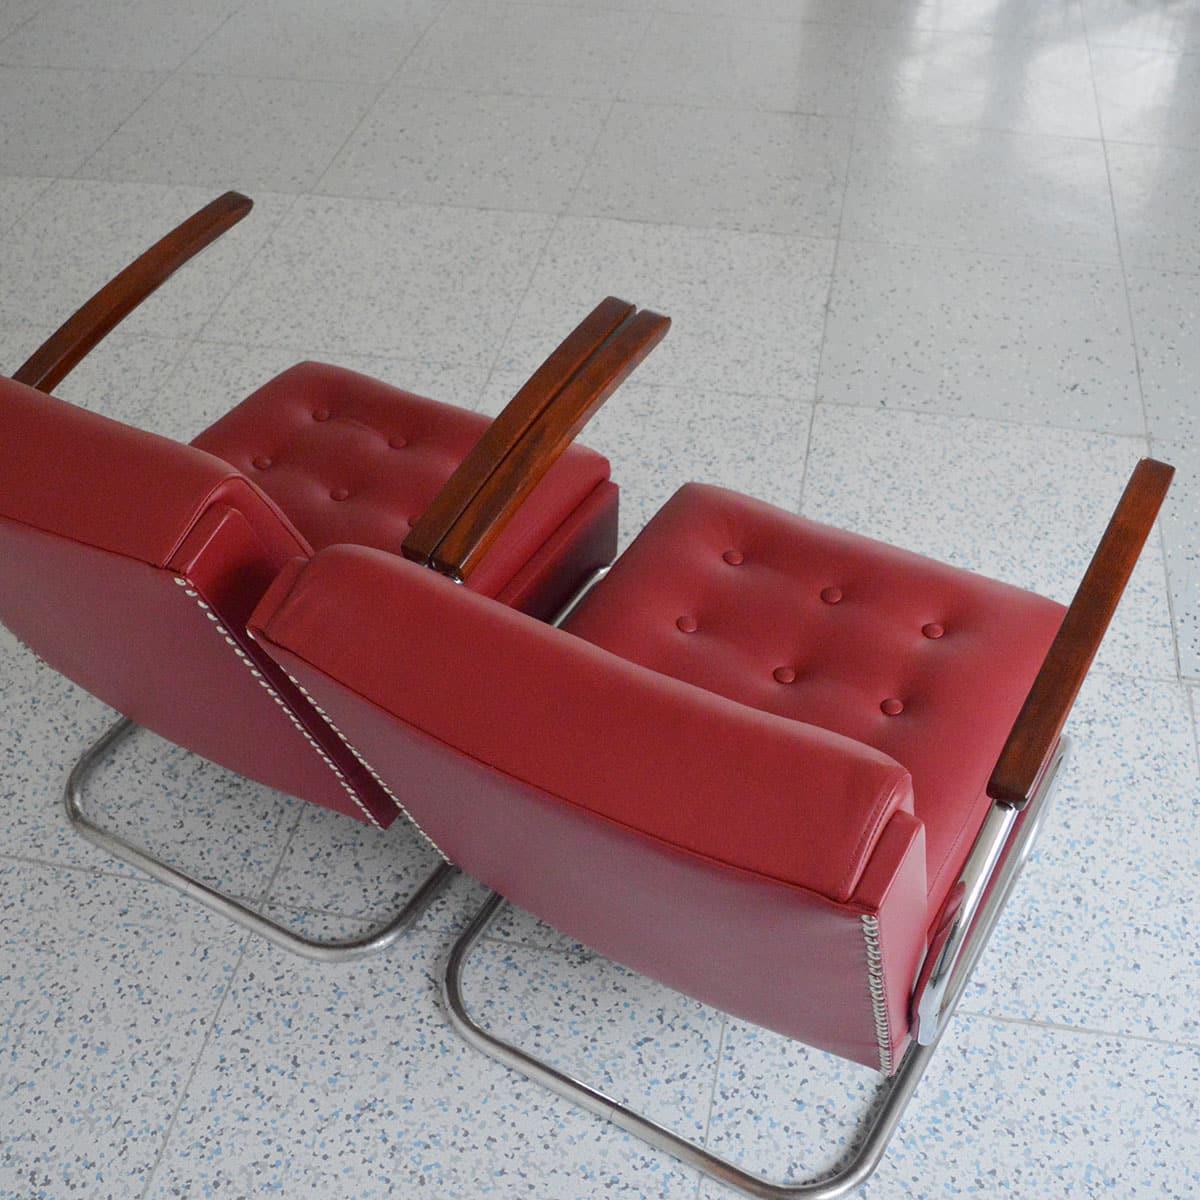 German Pair of Bauhaus Cantilever Armchairs Model S411 by Mücke & Melder, 1930s For Sale